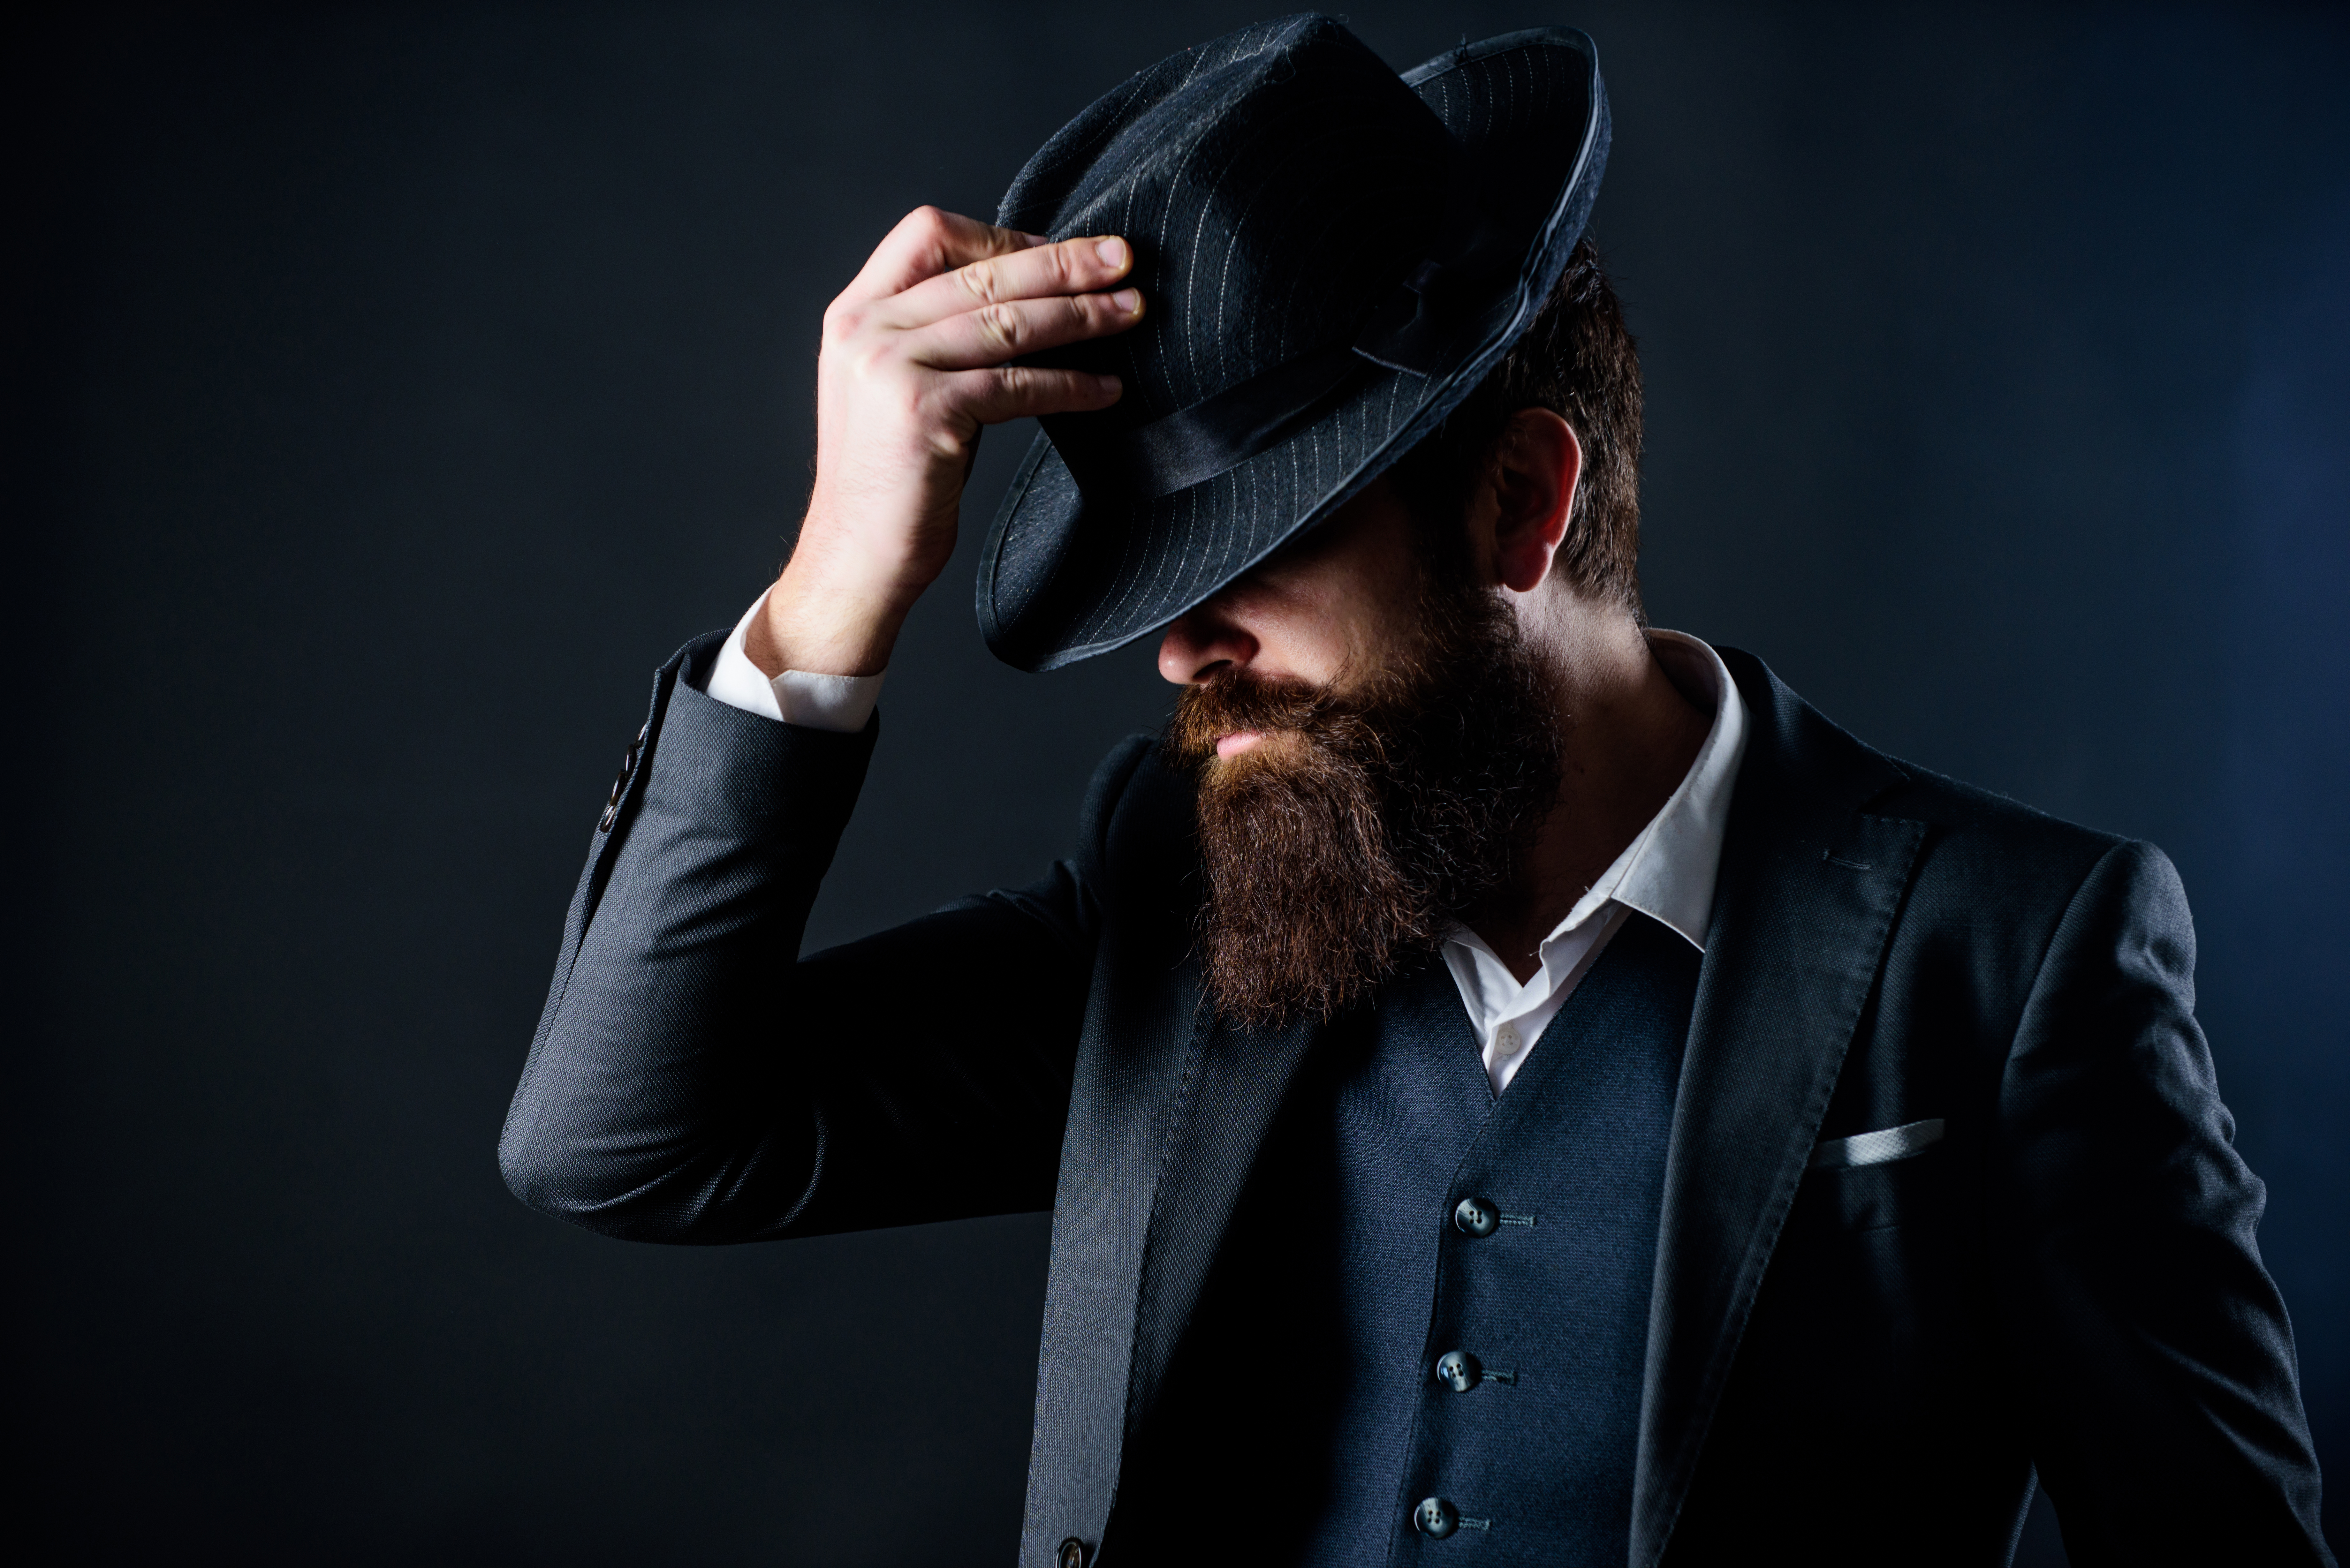 A man holding his hat | Source: Shutterstock